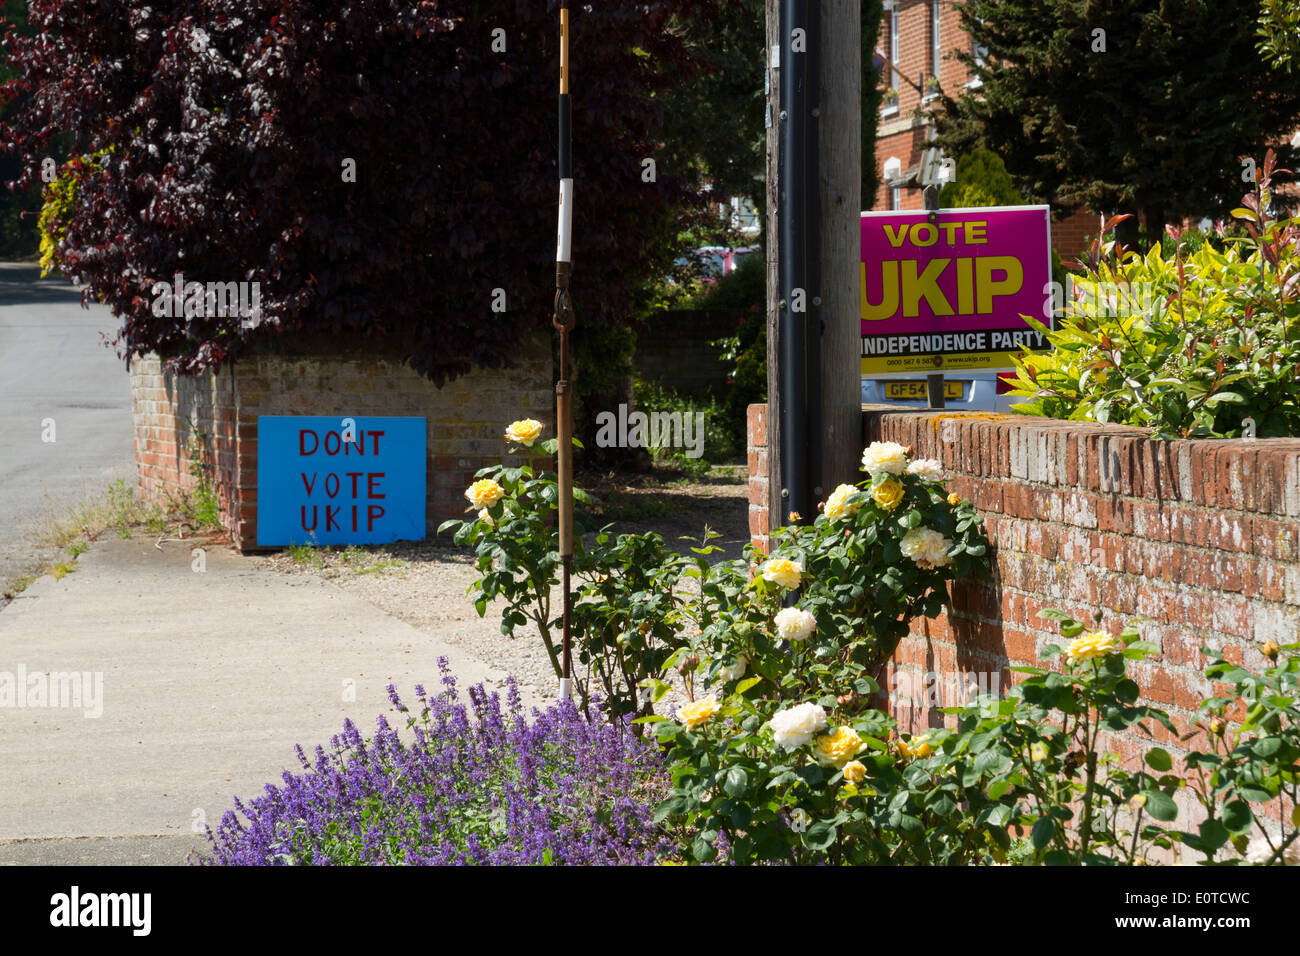 Vote UKIP and DONT VOTE UKIP election signs put up in the same street Stock Photo